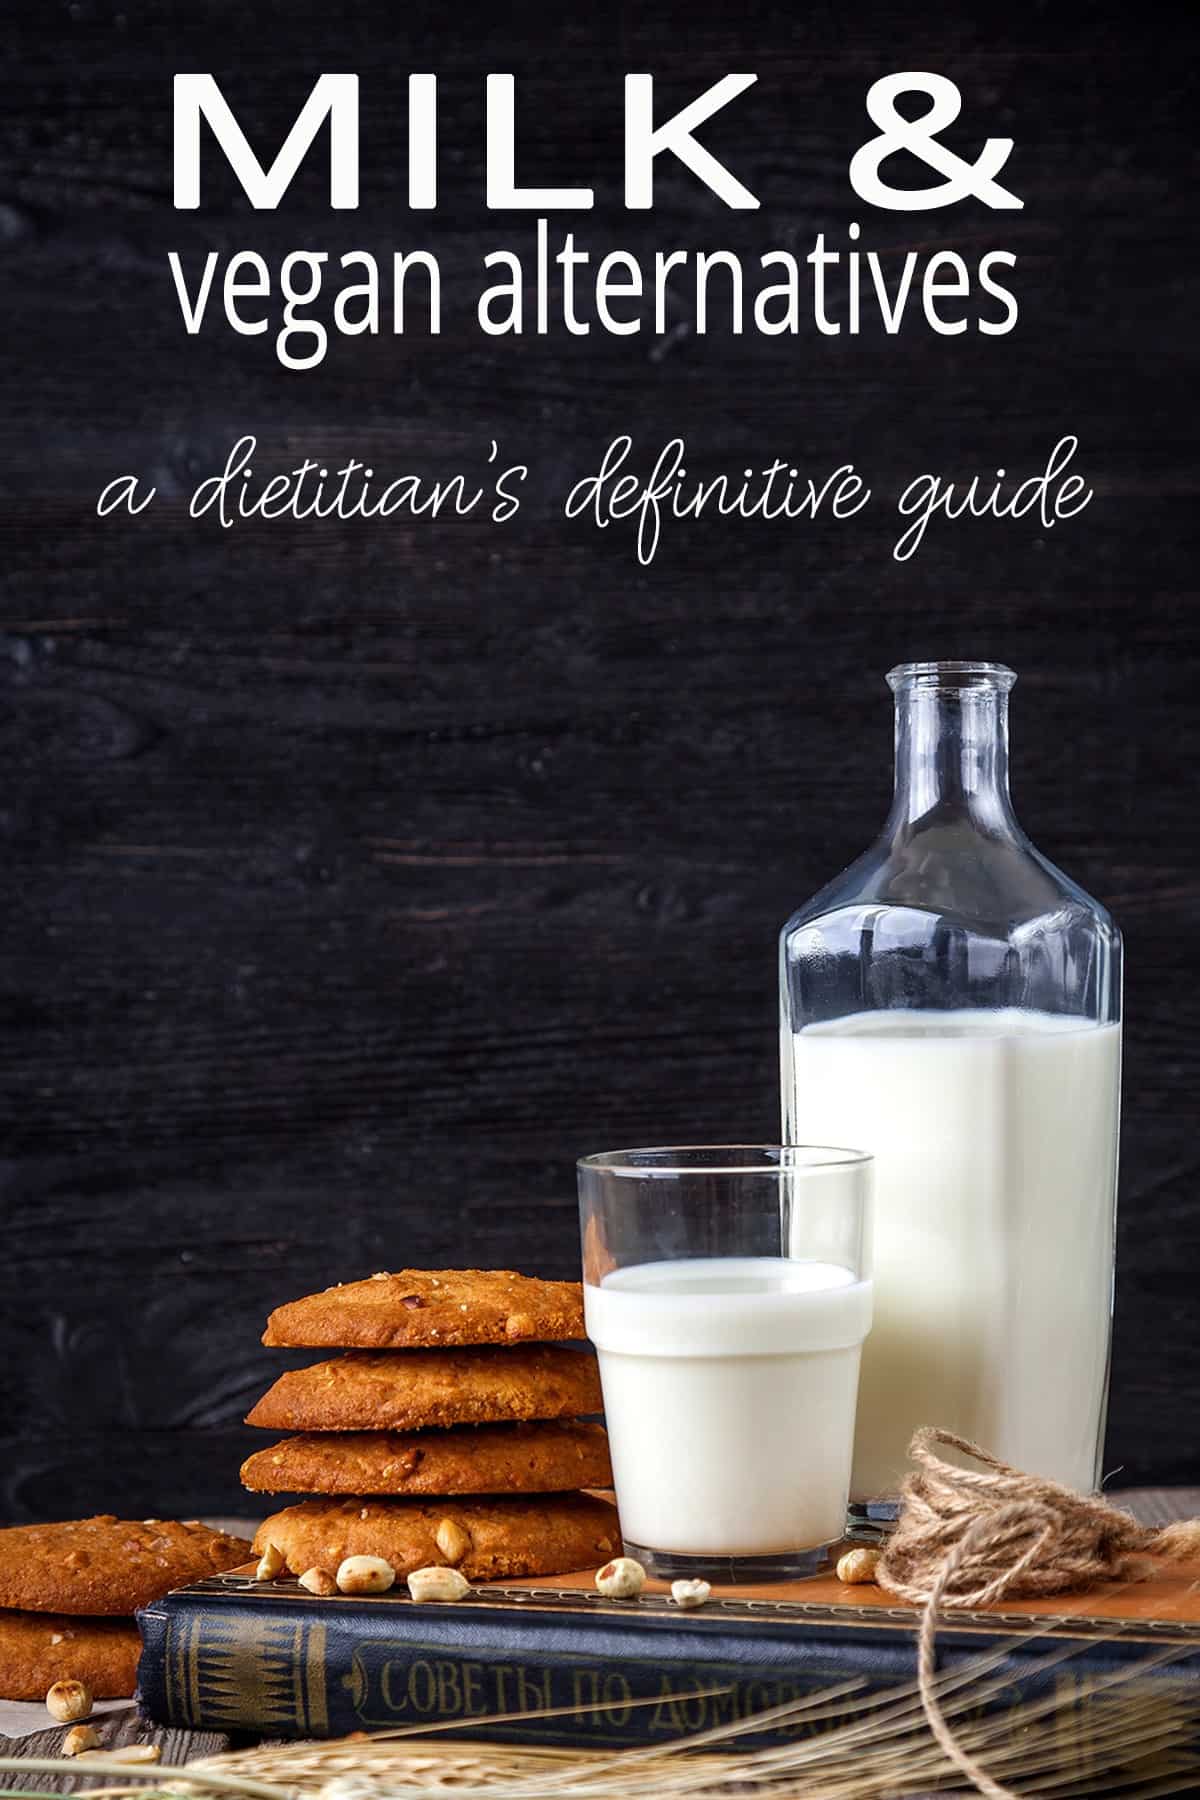 Milk alternatives -how to pick the right one for you and your family's needs